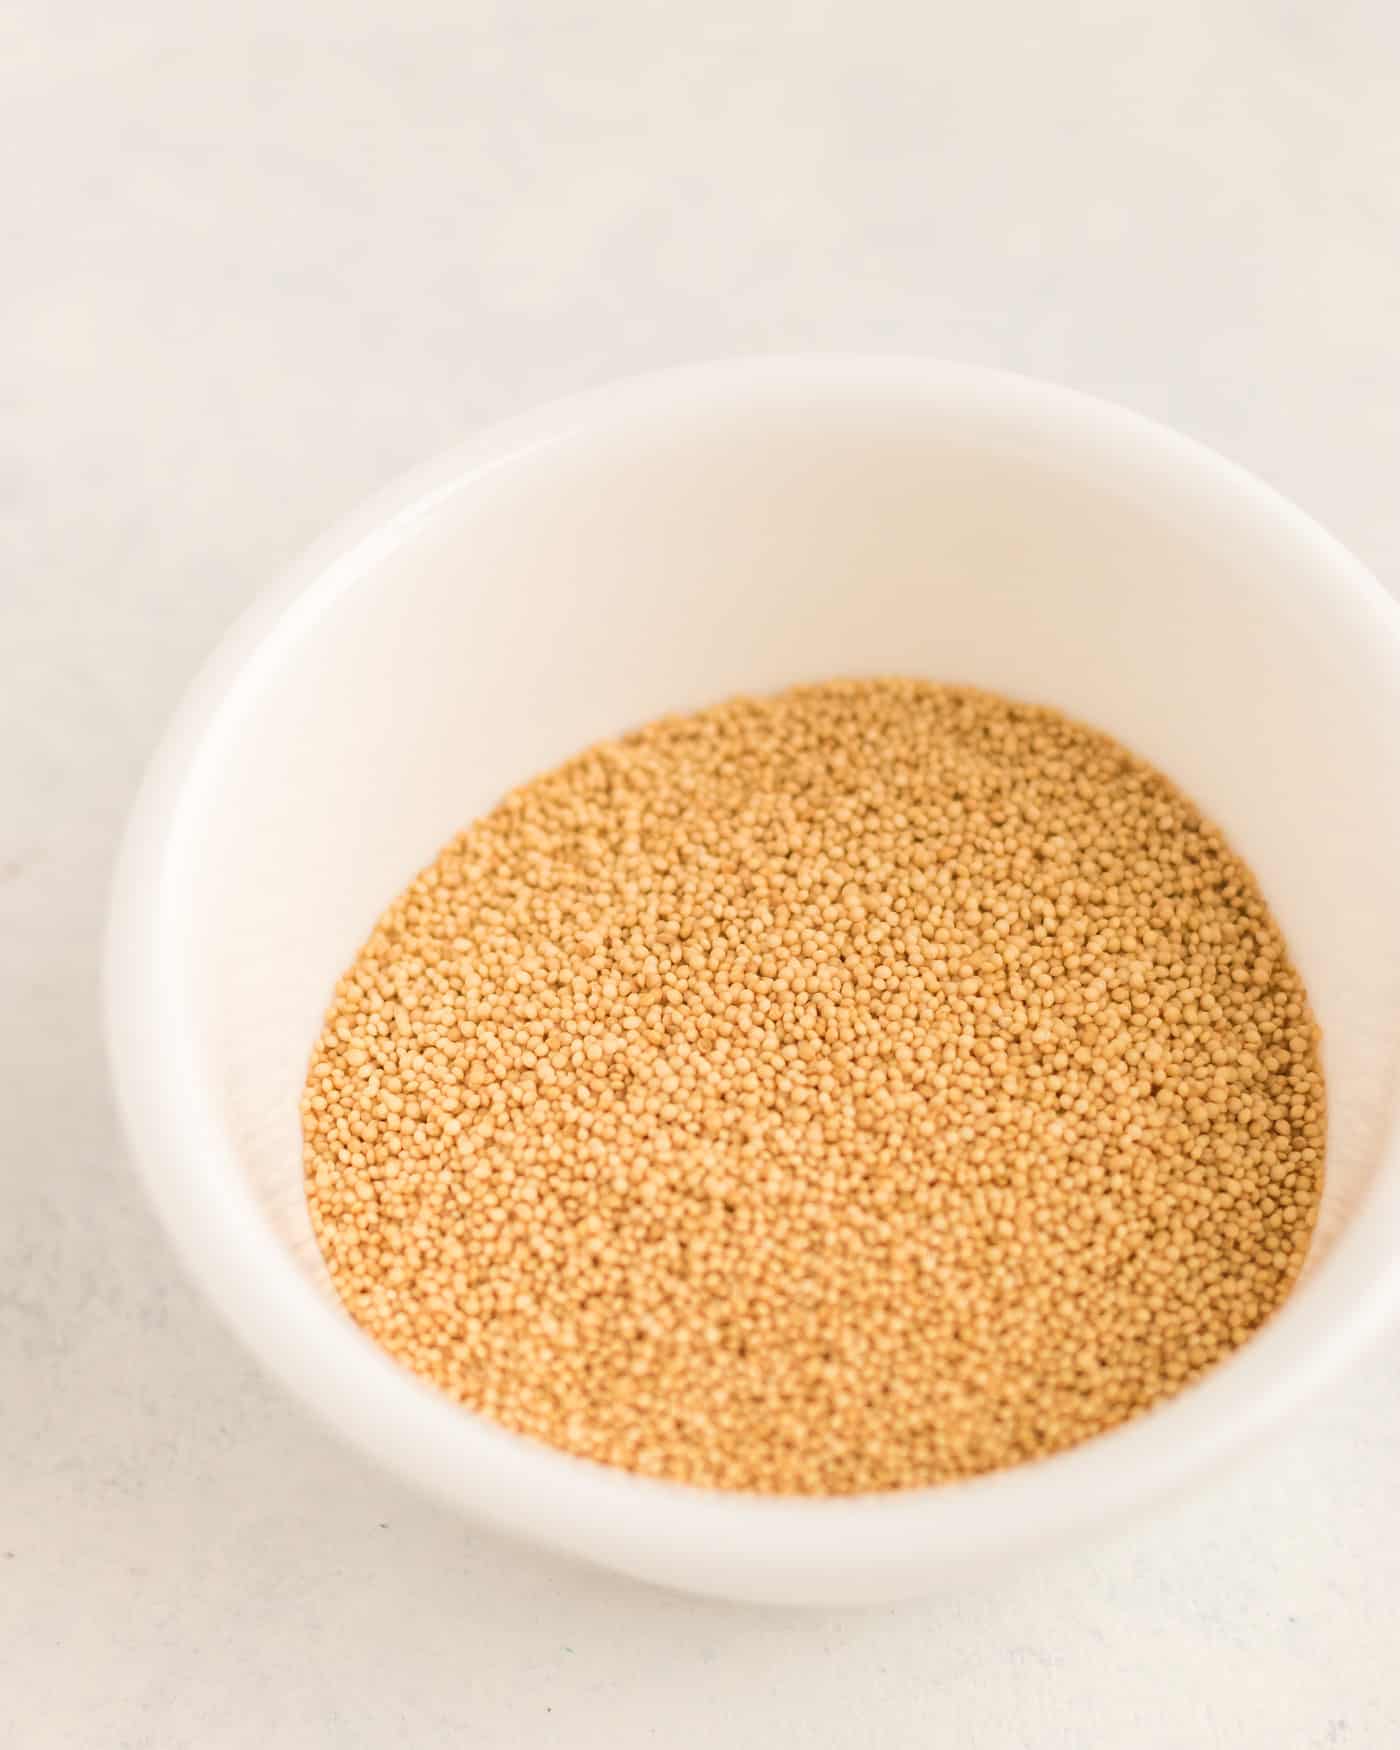 uncooked amaranth grain in a small bowl.